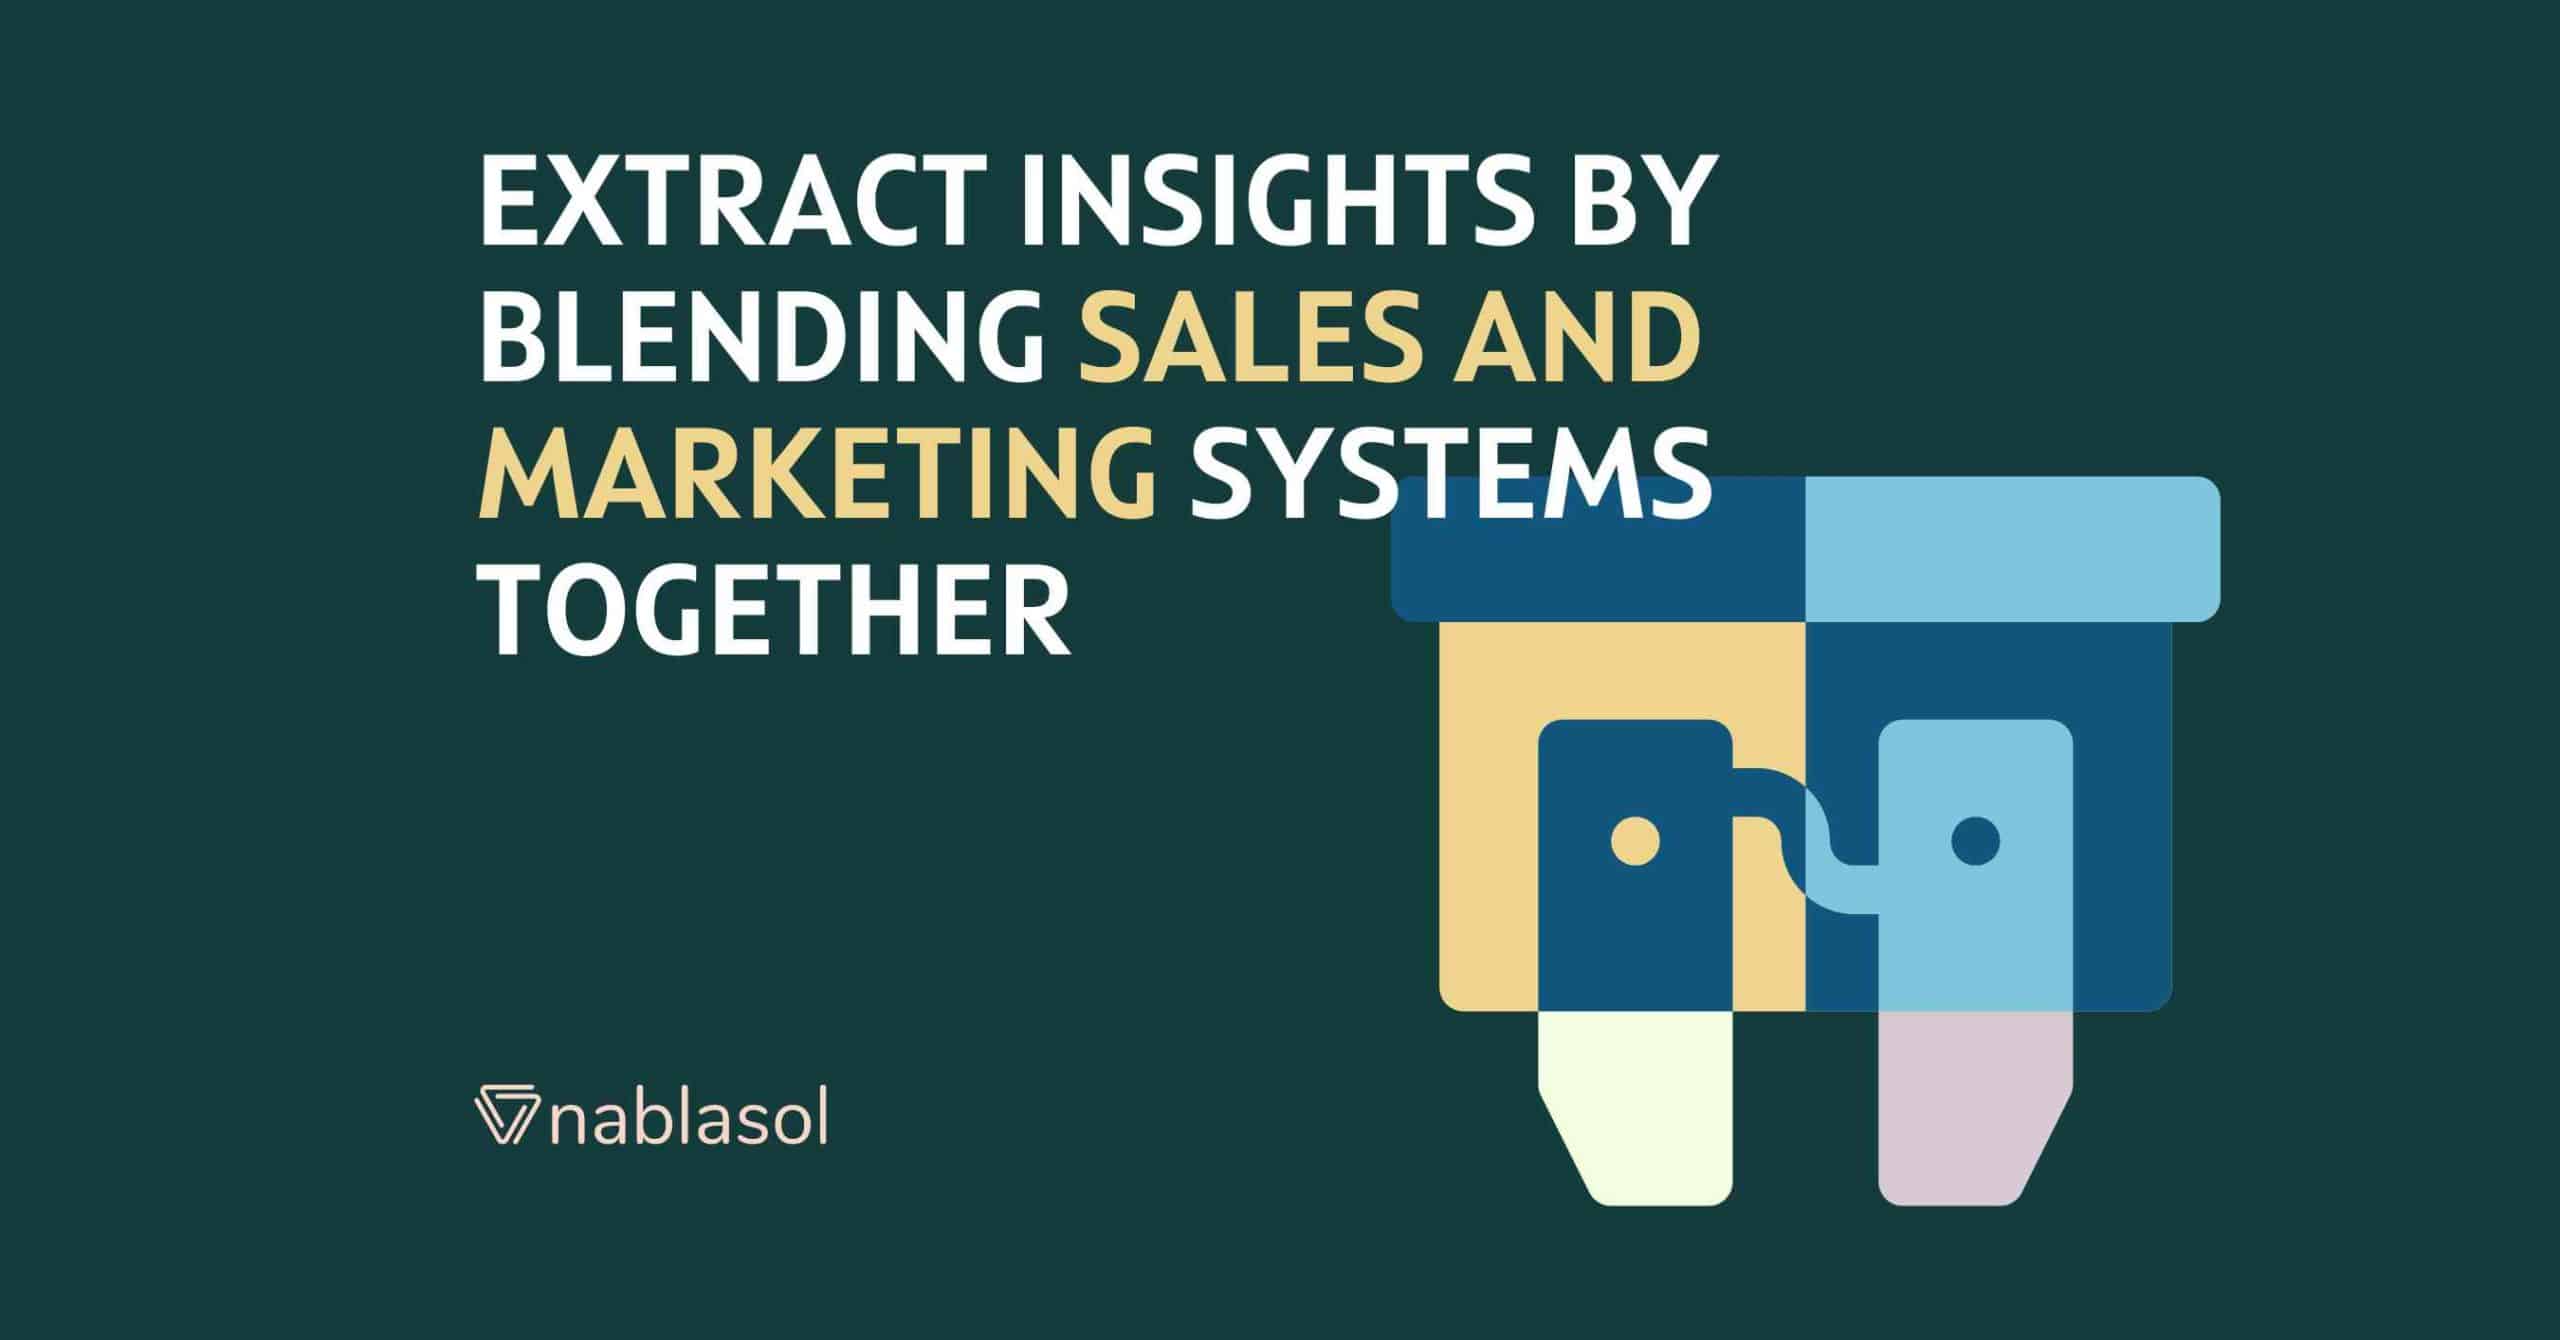 Can We Extract Insights By Blending Sales and Marketing Systems Together?